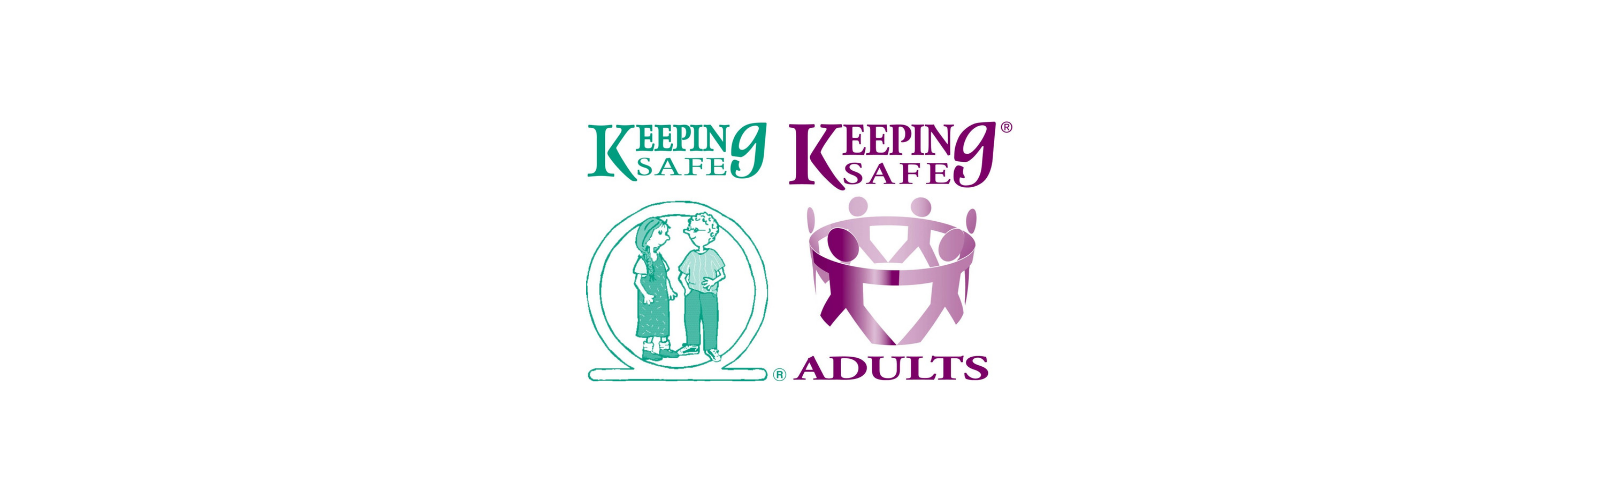 Keeping Children and Adults Safe